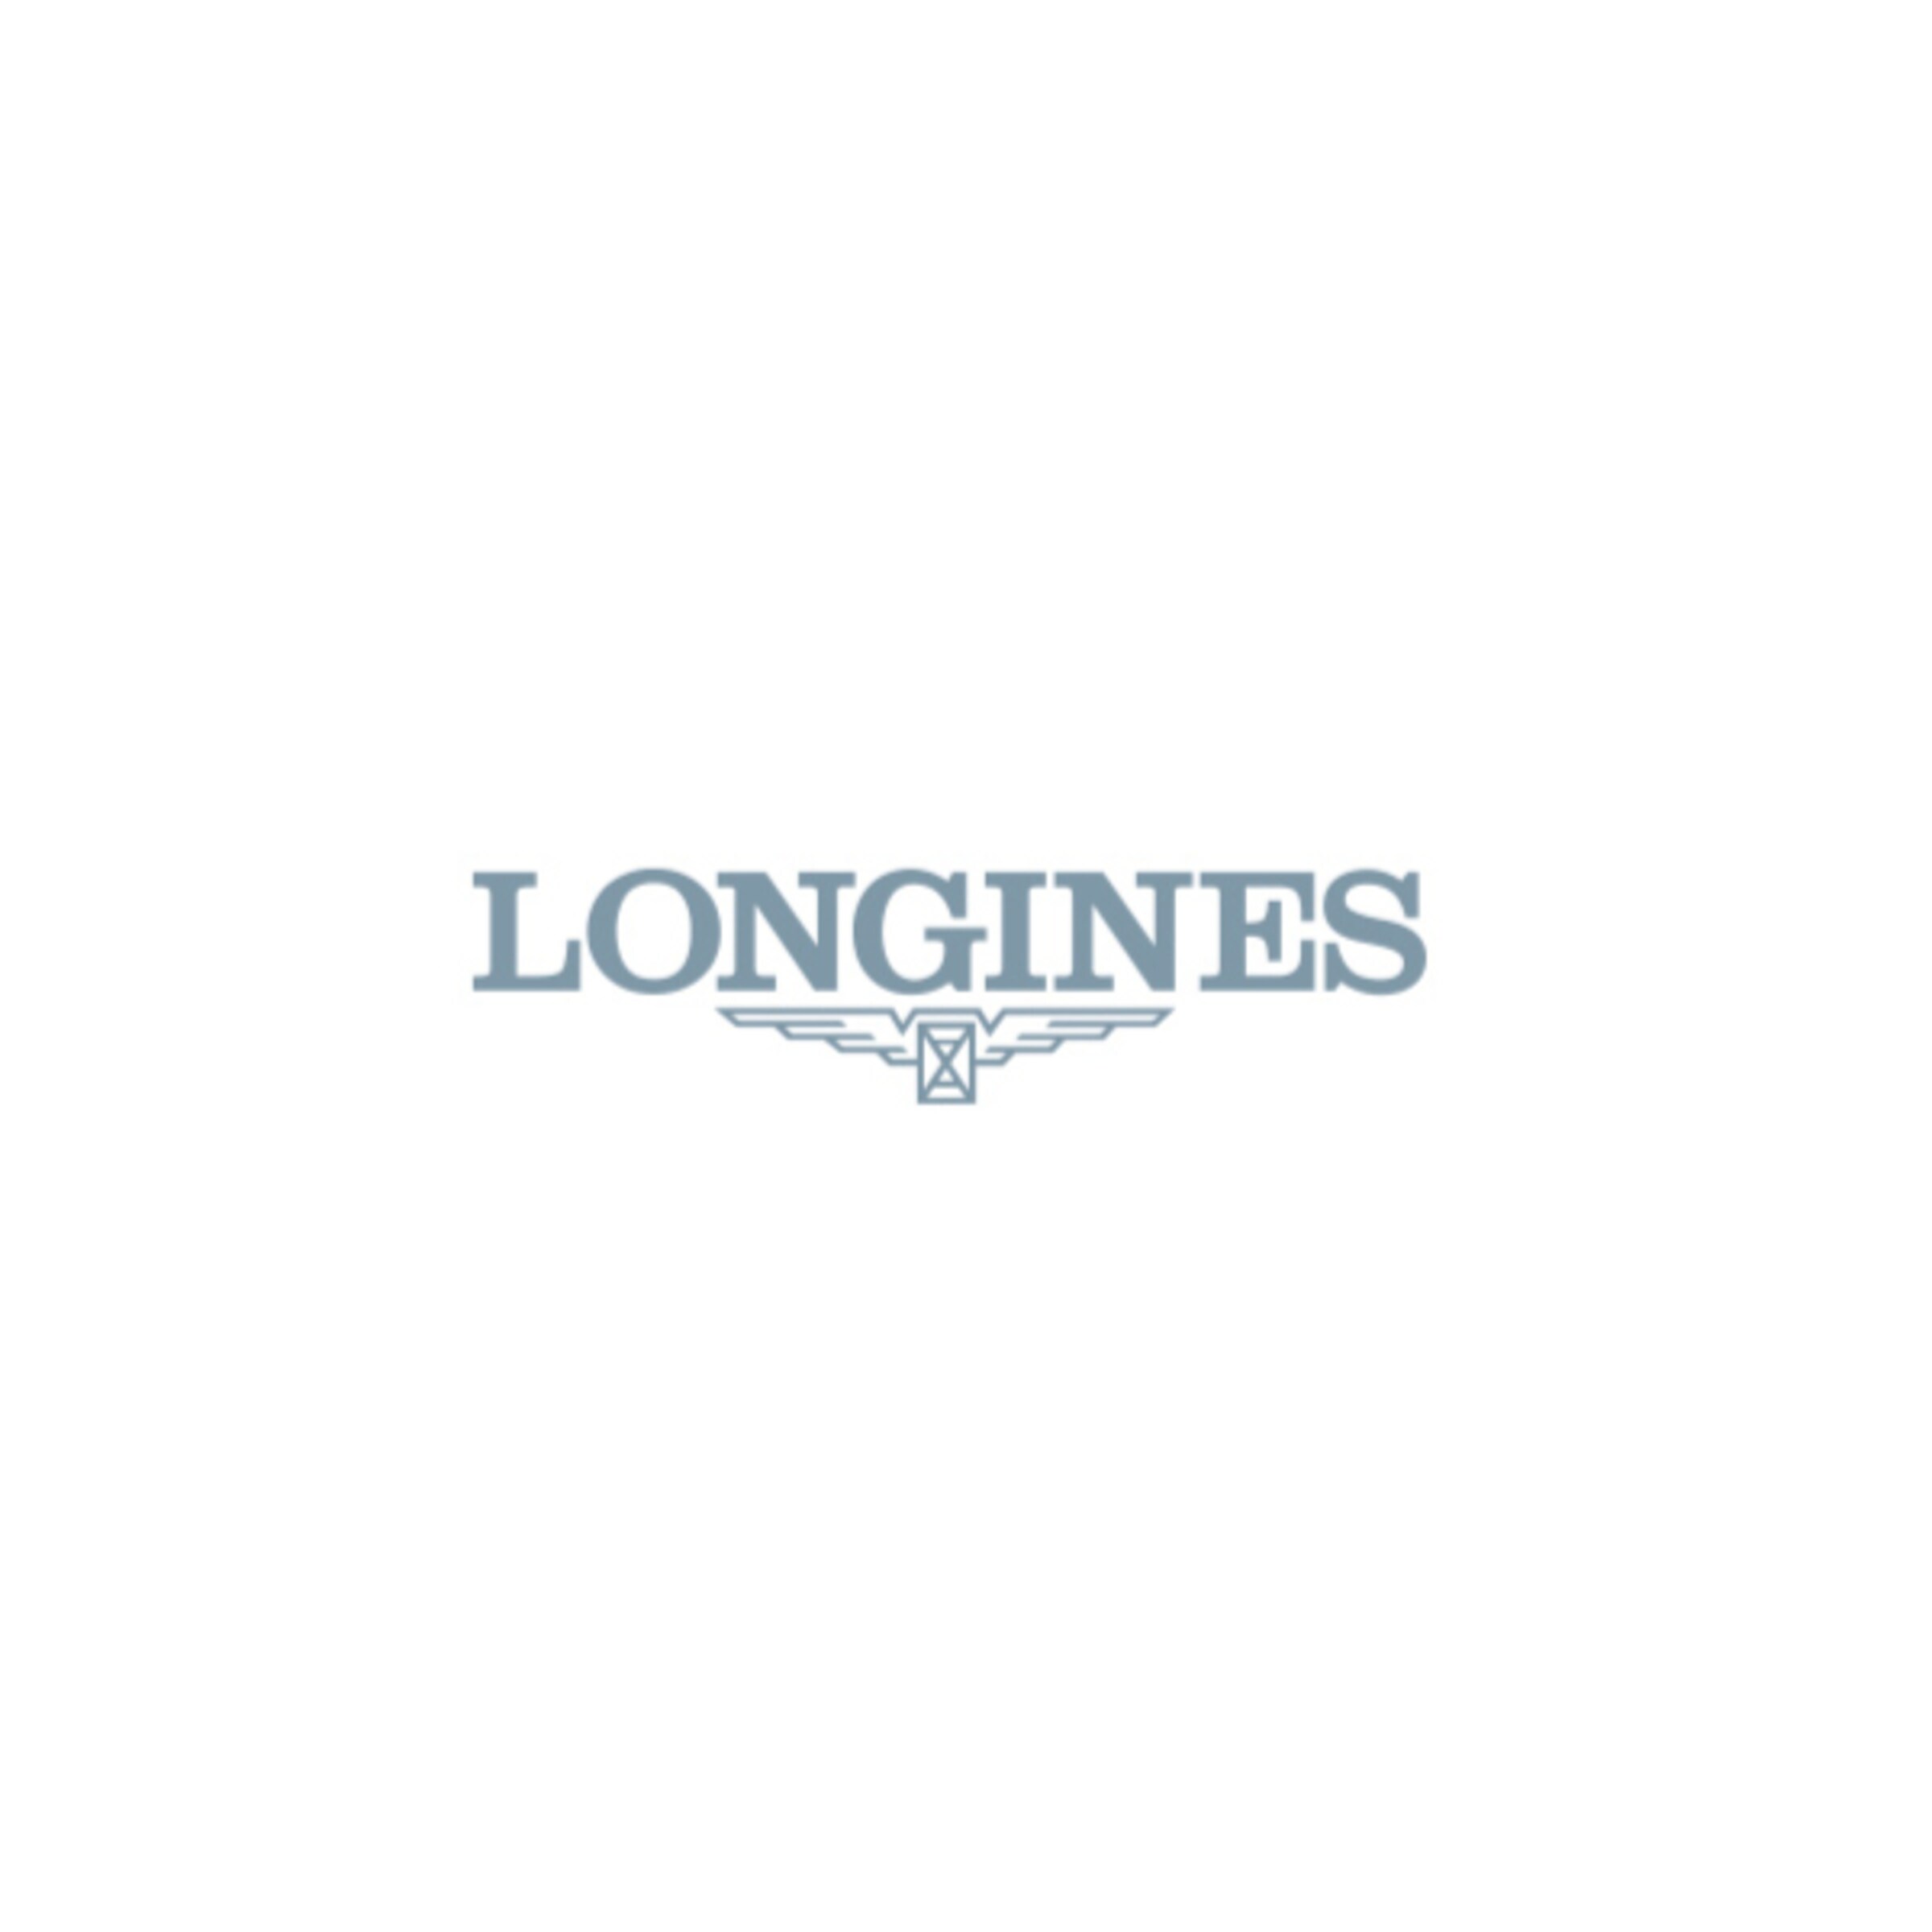 the-longines-master-collection-l2-893-4-92-6-detailed-view-2286x2000-101-1692615862.jpg